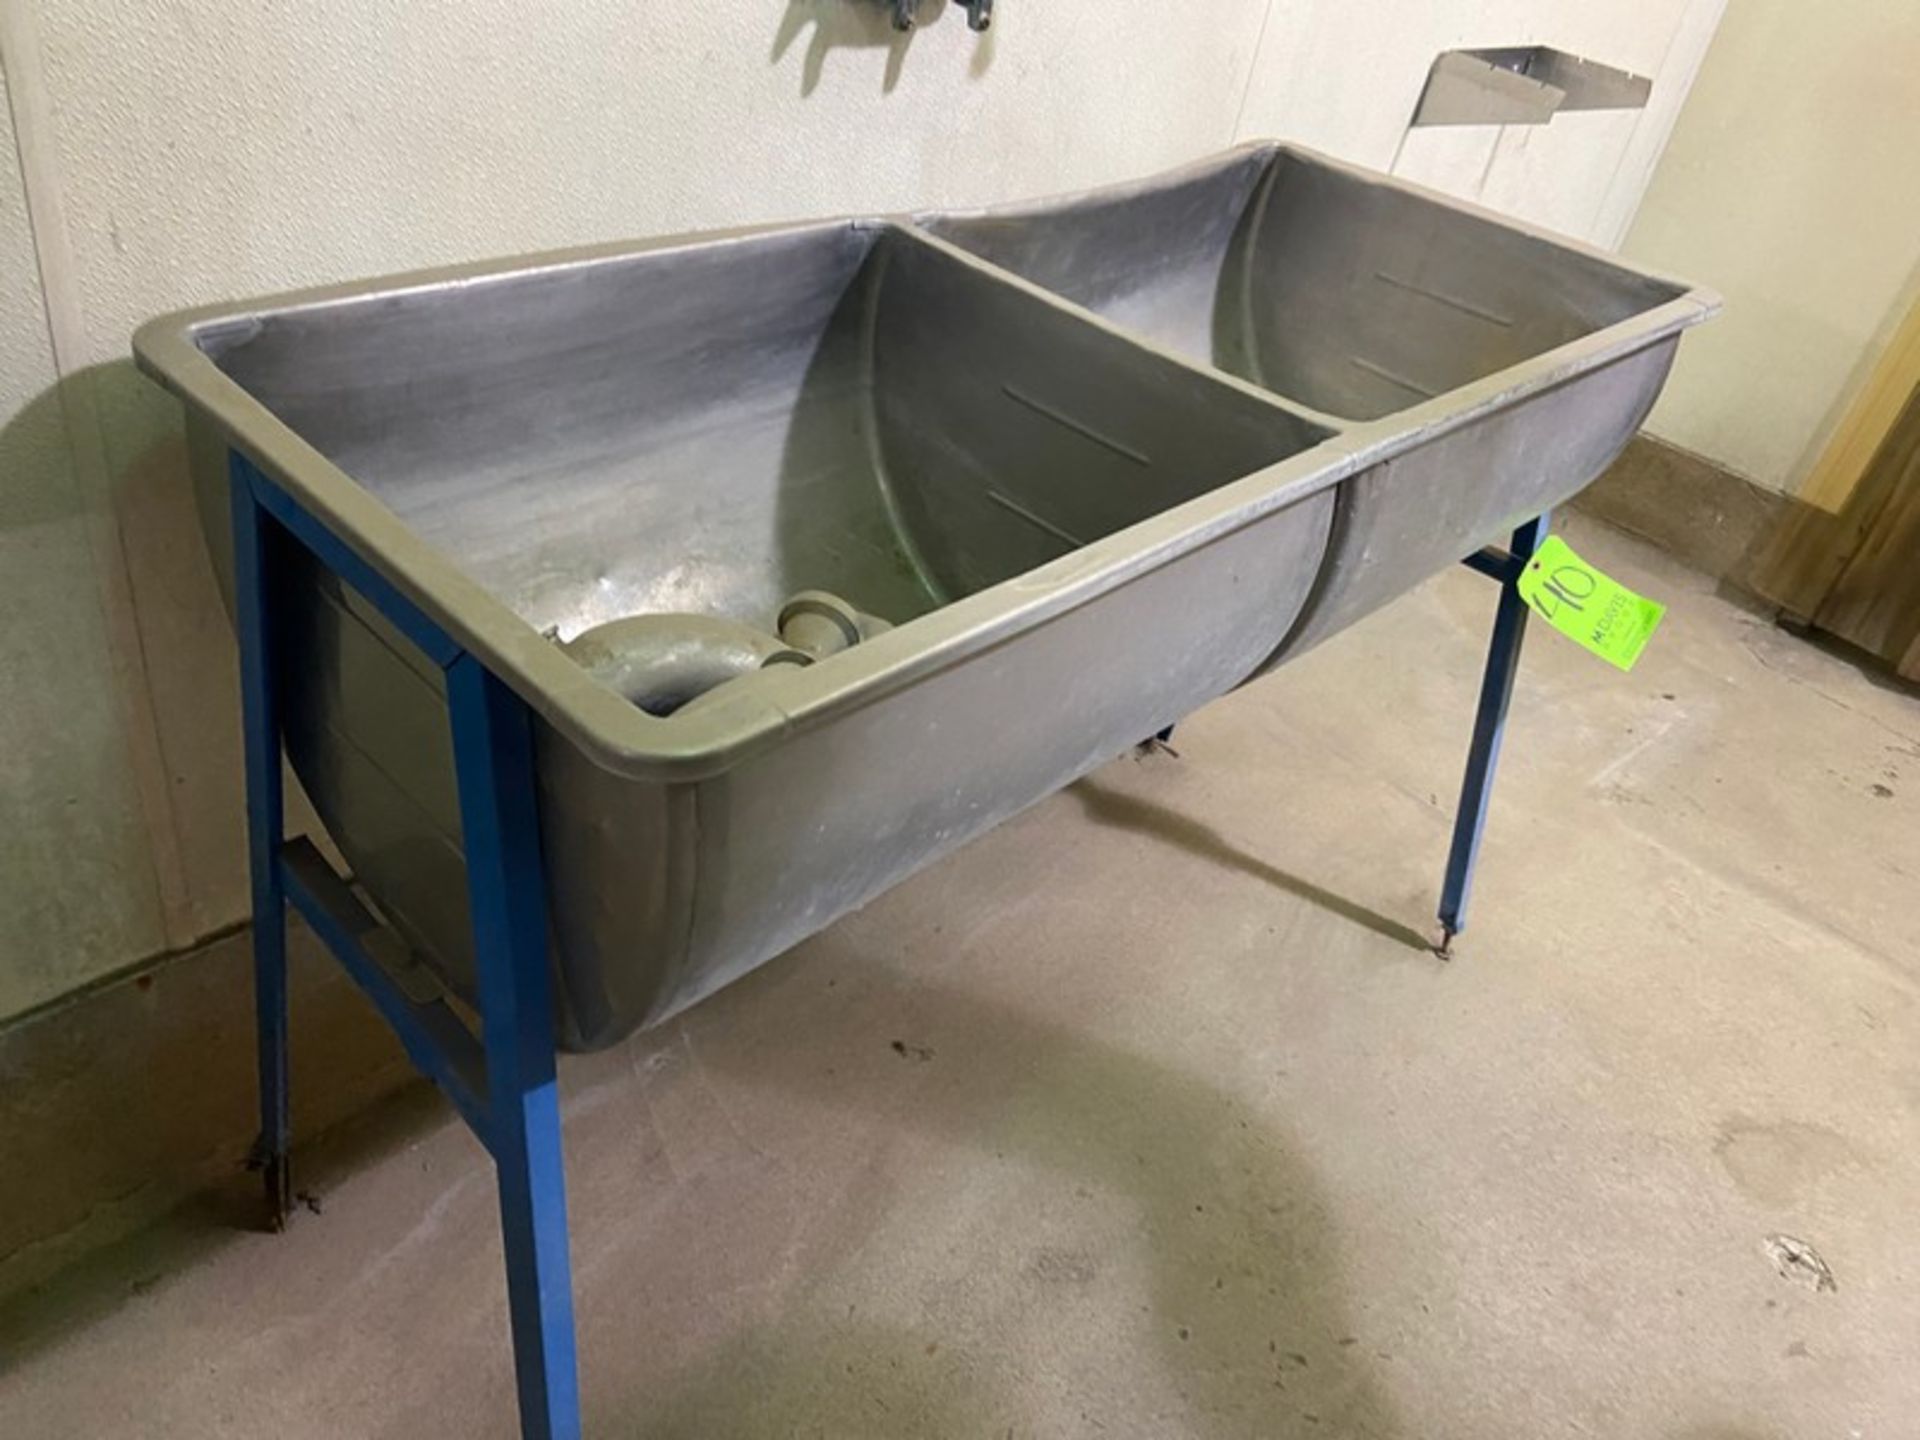 2-Bowl S/S Sink, Mounted on Mild Steel Frame (LOCATED IN MANTECA, CA) - Image 2 of 2